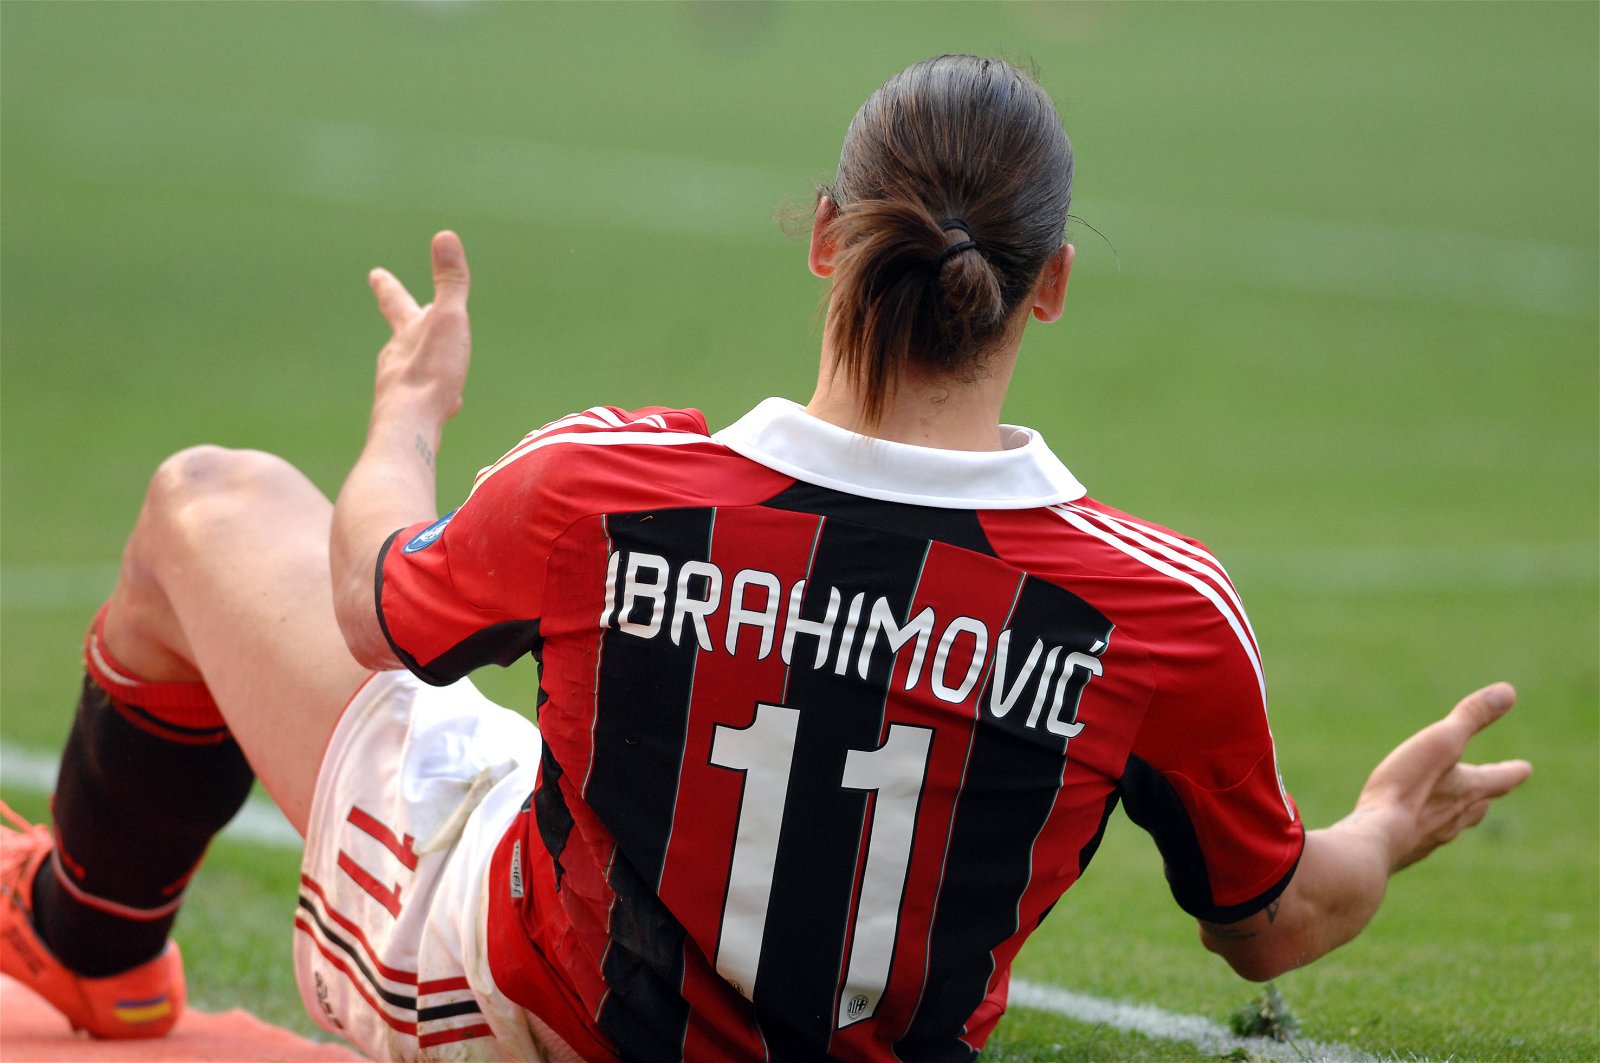 MLS commissioner Garber claims Zlatan Ibrahimovic is being recruited by AC Milan